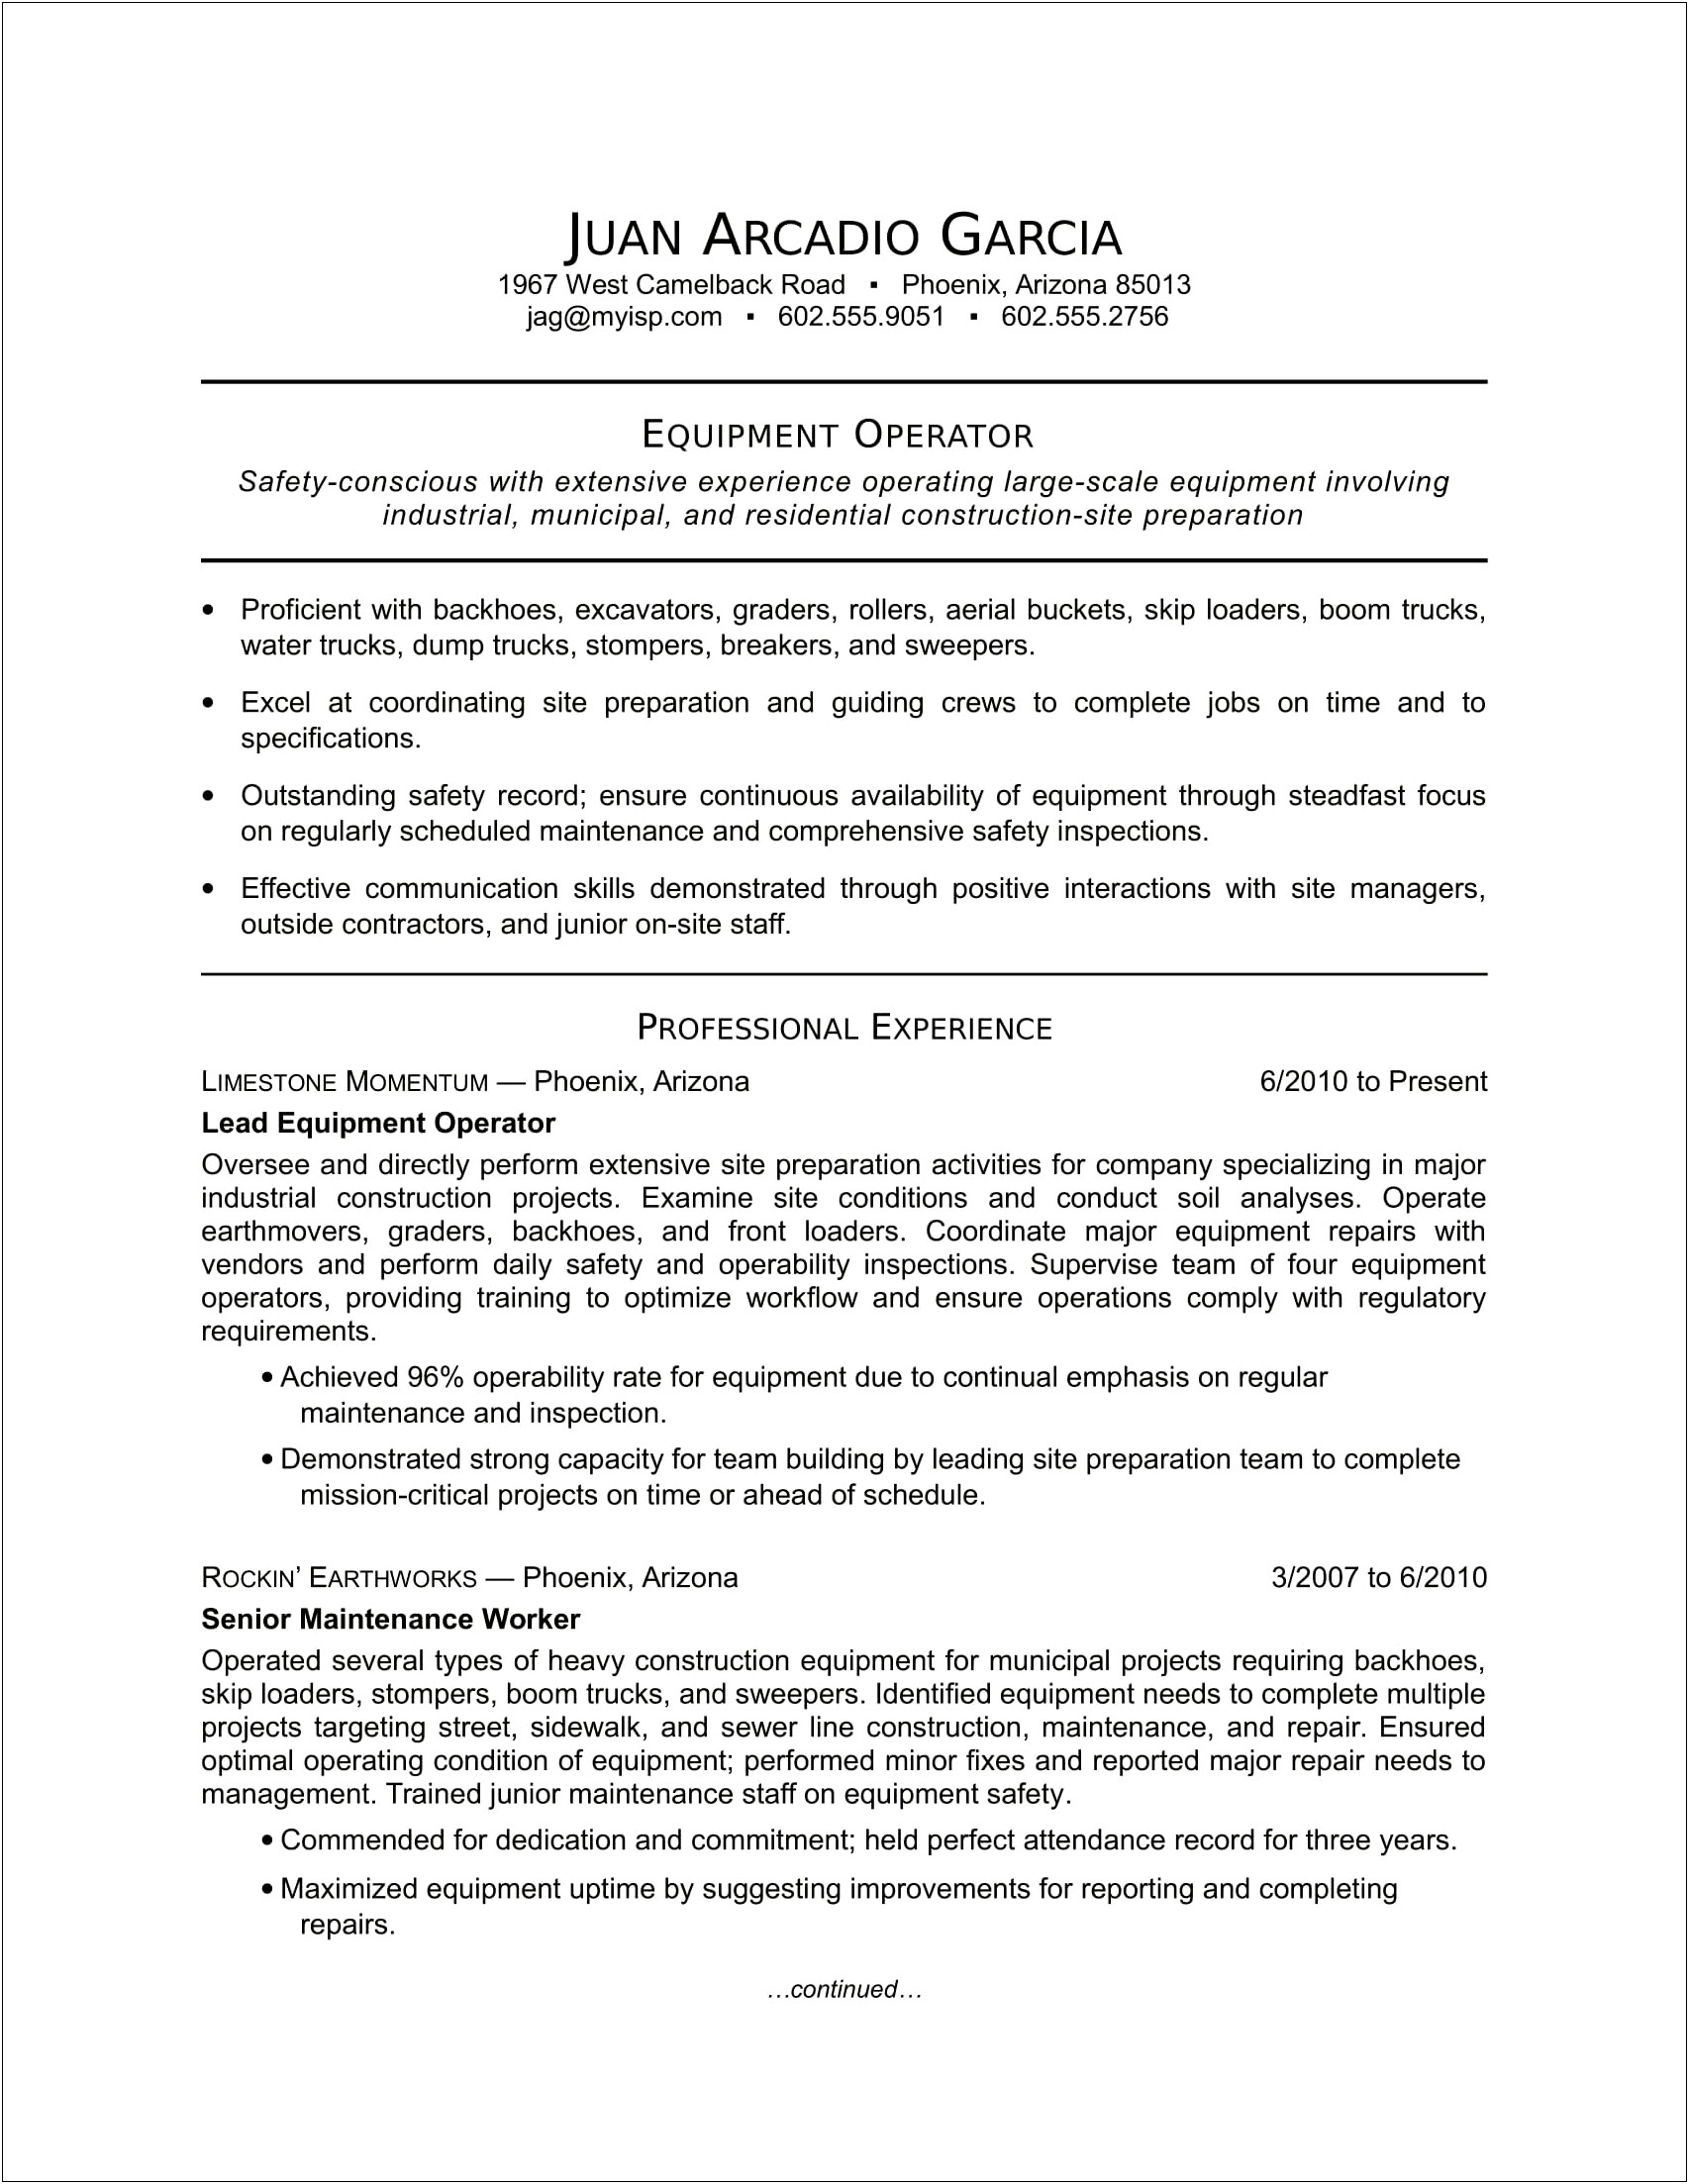 Can I Use The Word Profecient On Resume